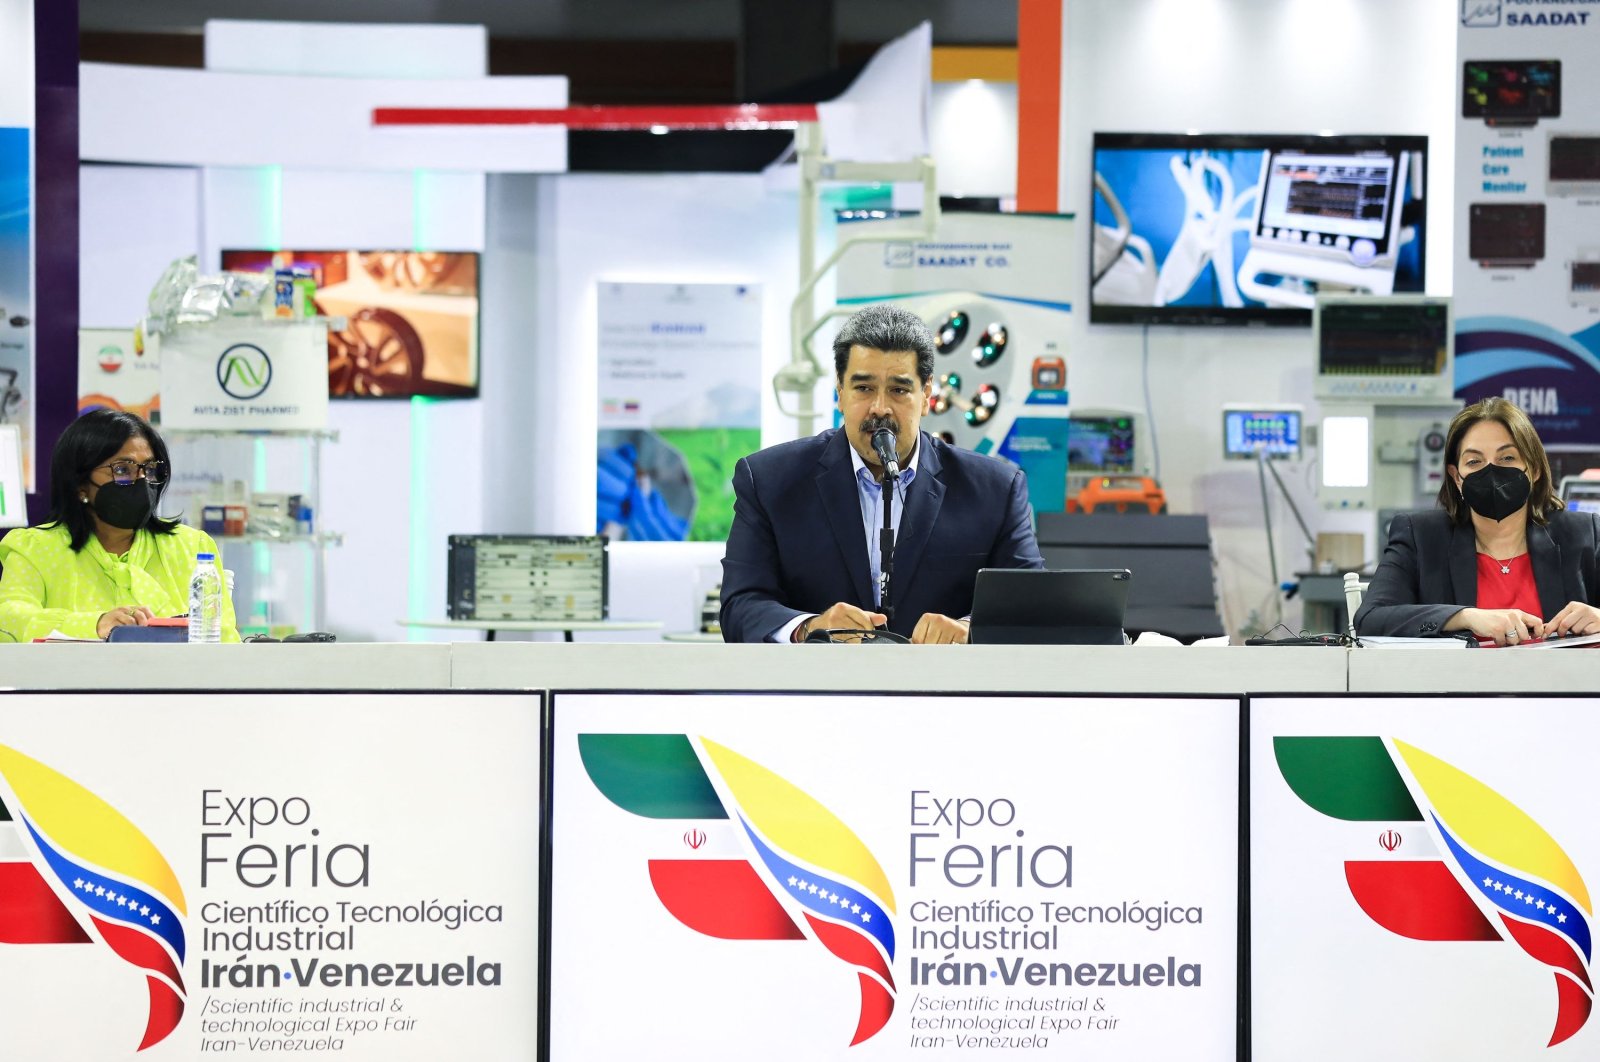 Venezuela&#039;s President Nicolas Maduro (C) speaking next to Vice-President Delcy Rodriguez (L) and Minister of Science and Technology Gabriela Jimenez during the opening ceremony of the Iran-Venezuela Industrial Scientific and Technological Expoferia, at the Poliedro stadium in Caracas, Sept. 15, 2022. (Venezuelan Presidency / AFP)